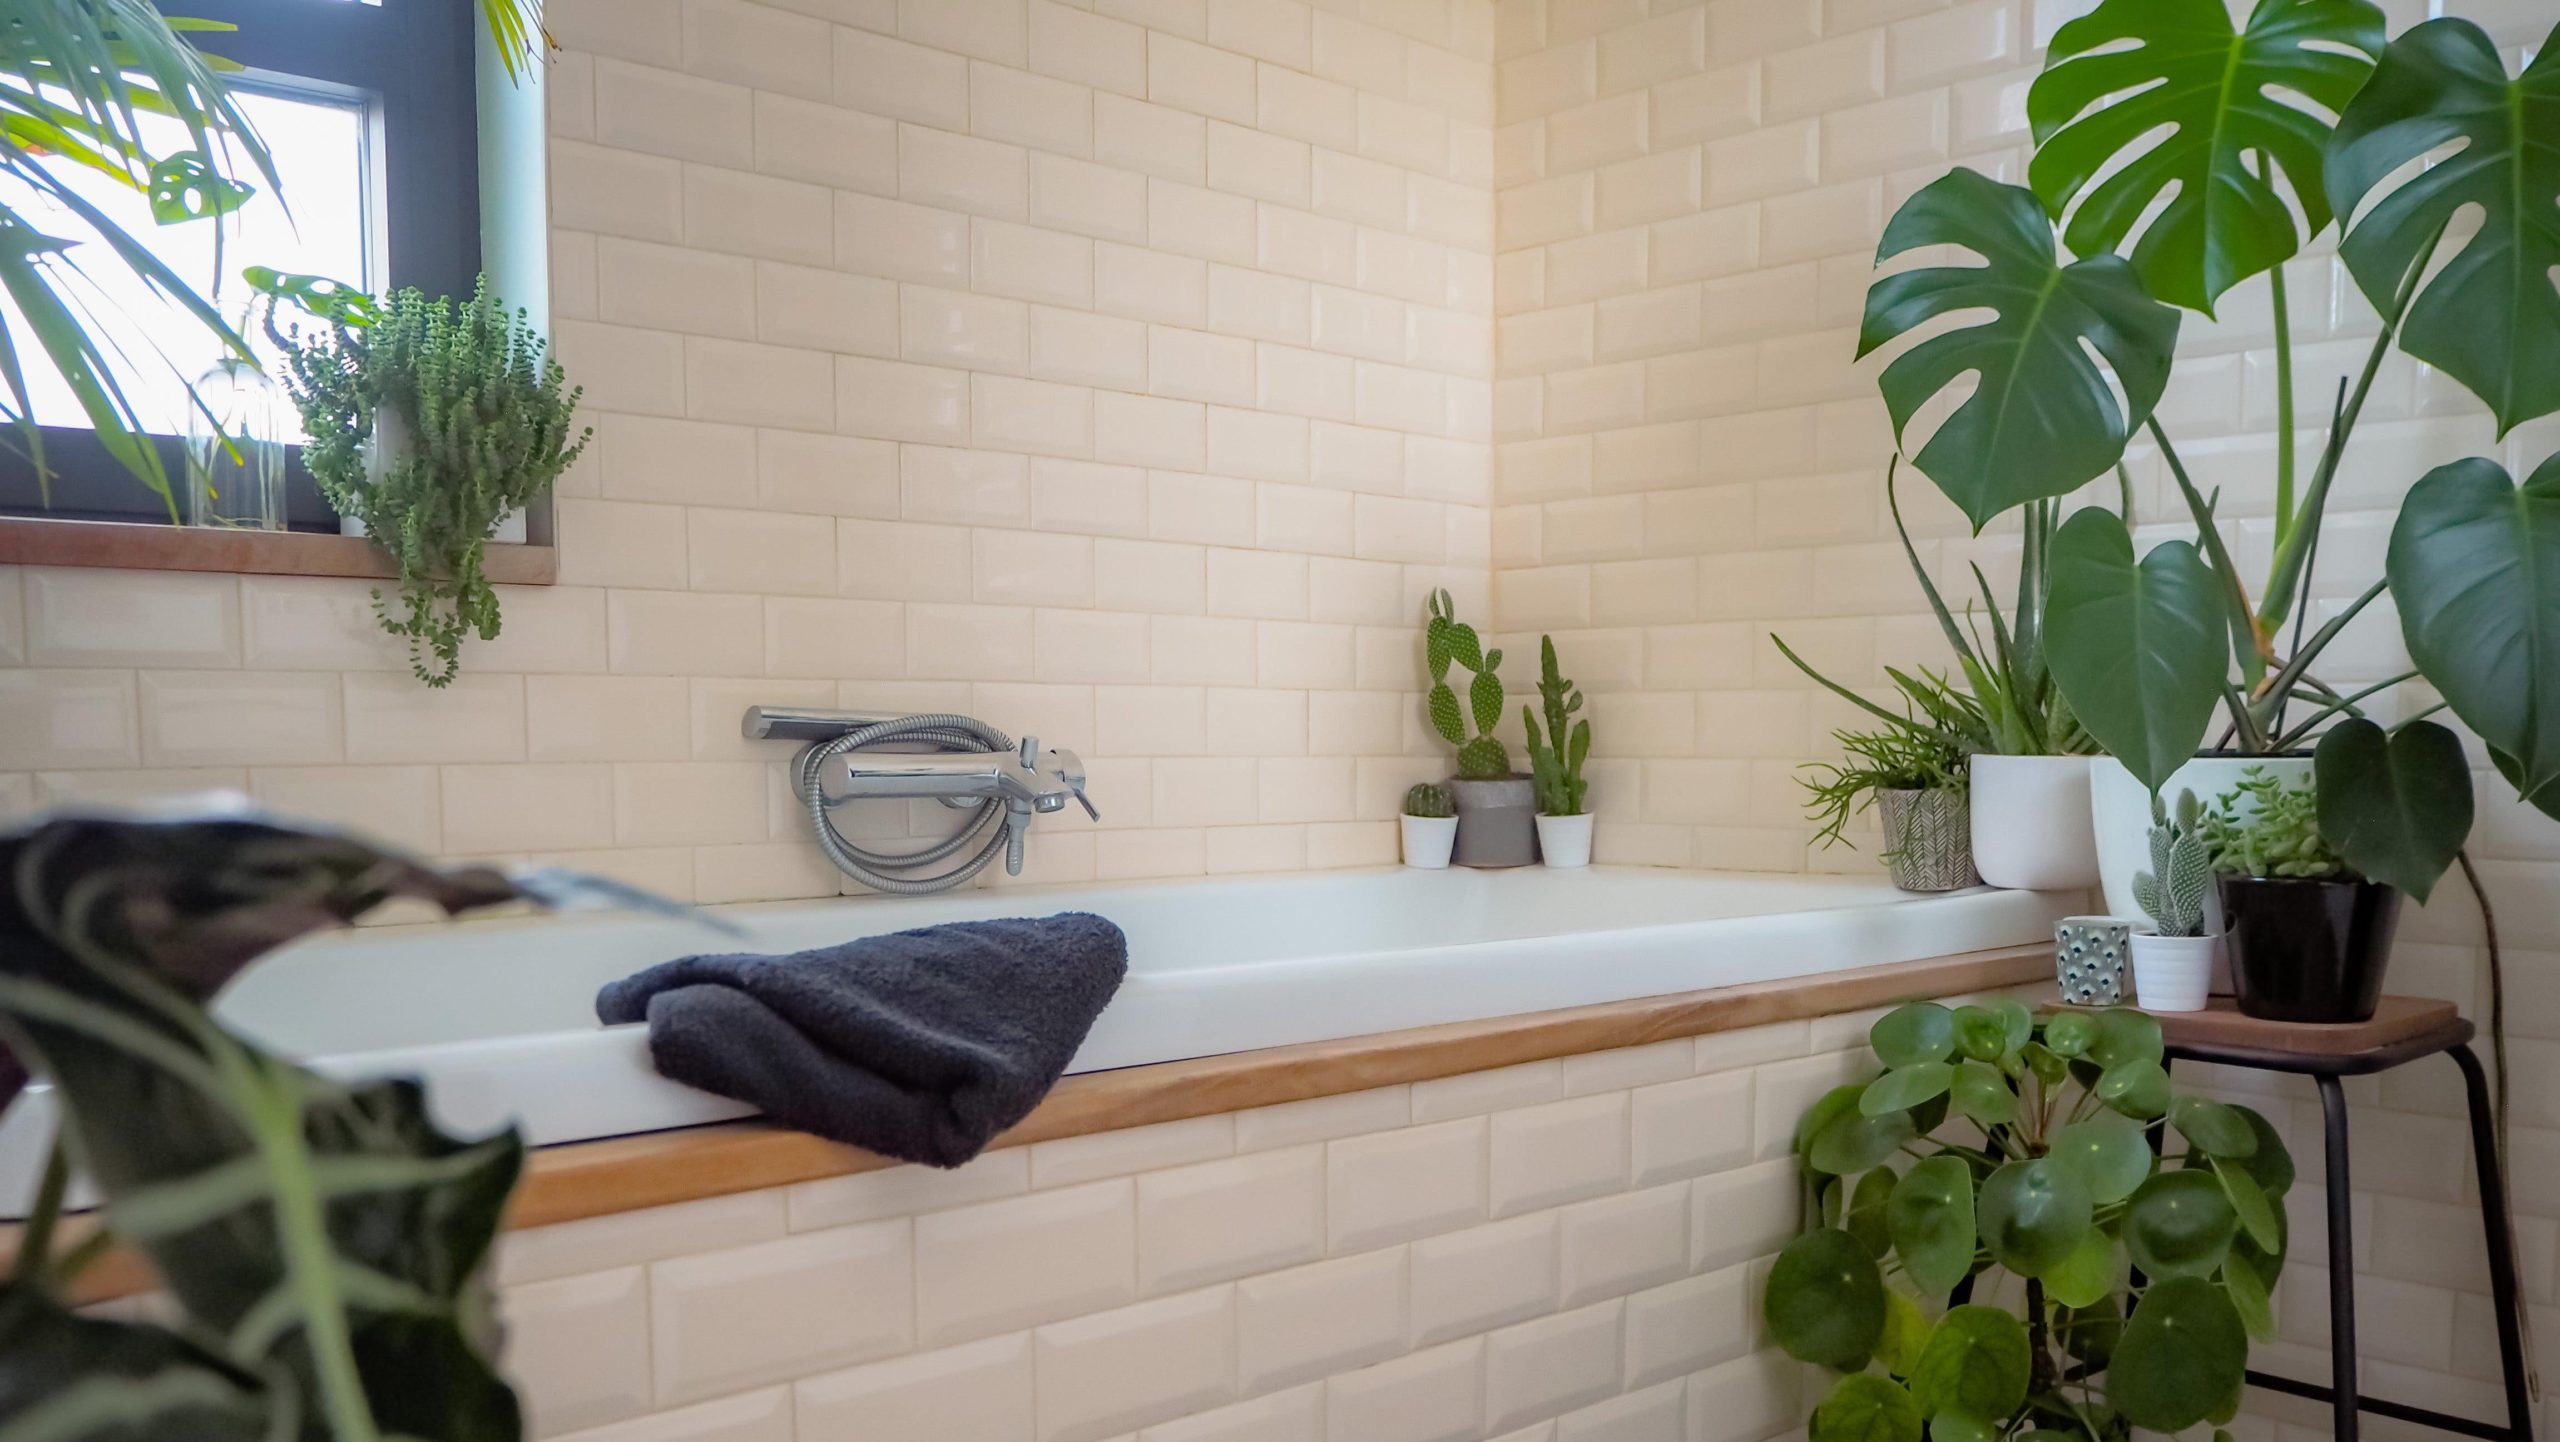 These High Humidity Plants Will Thrive in Your Bathroom